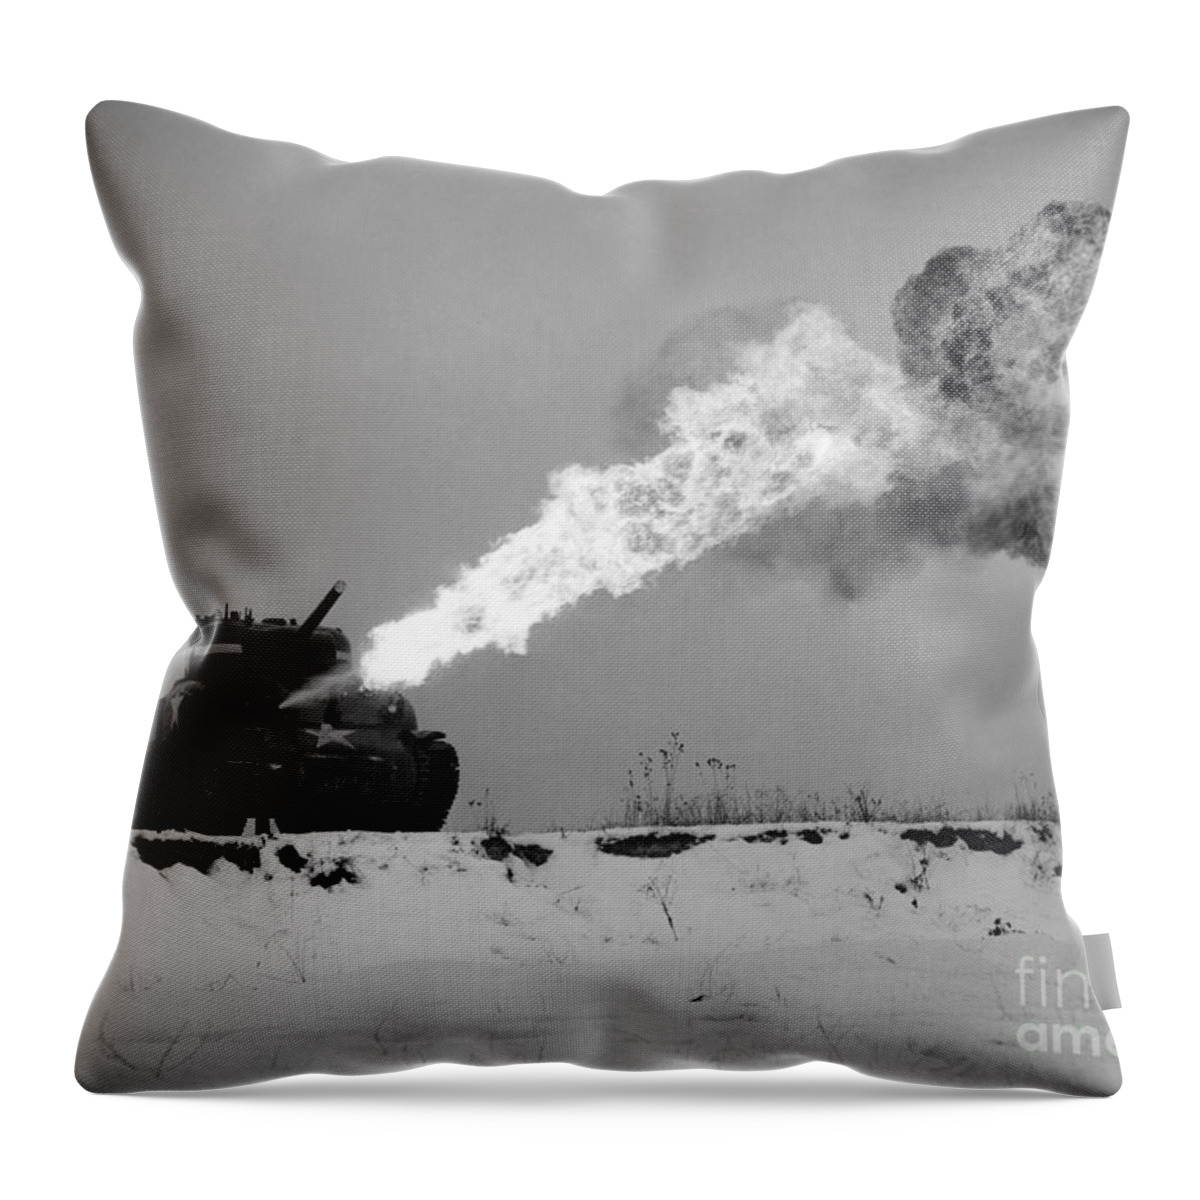 Tank Throw Pillow featuring the photograph Flame-throwing Tank by Photo Researchers